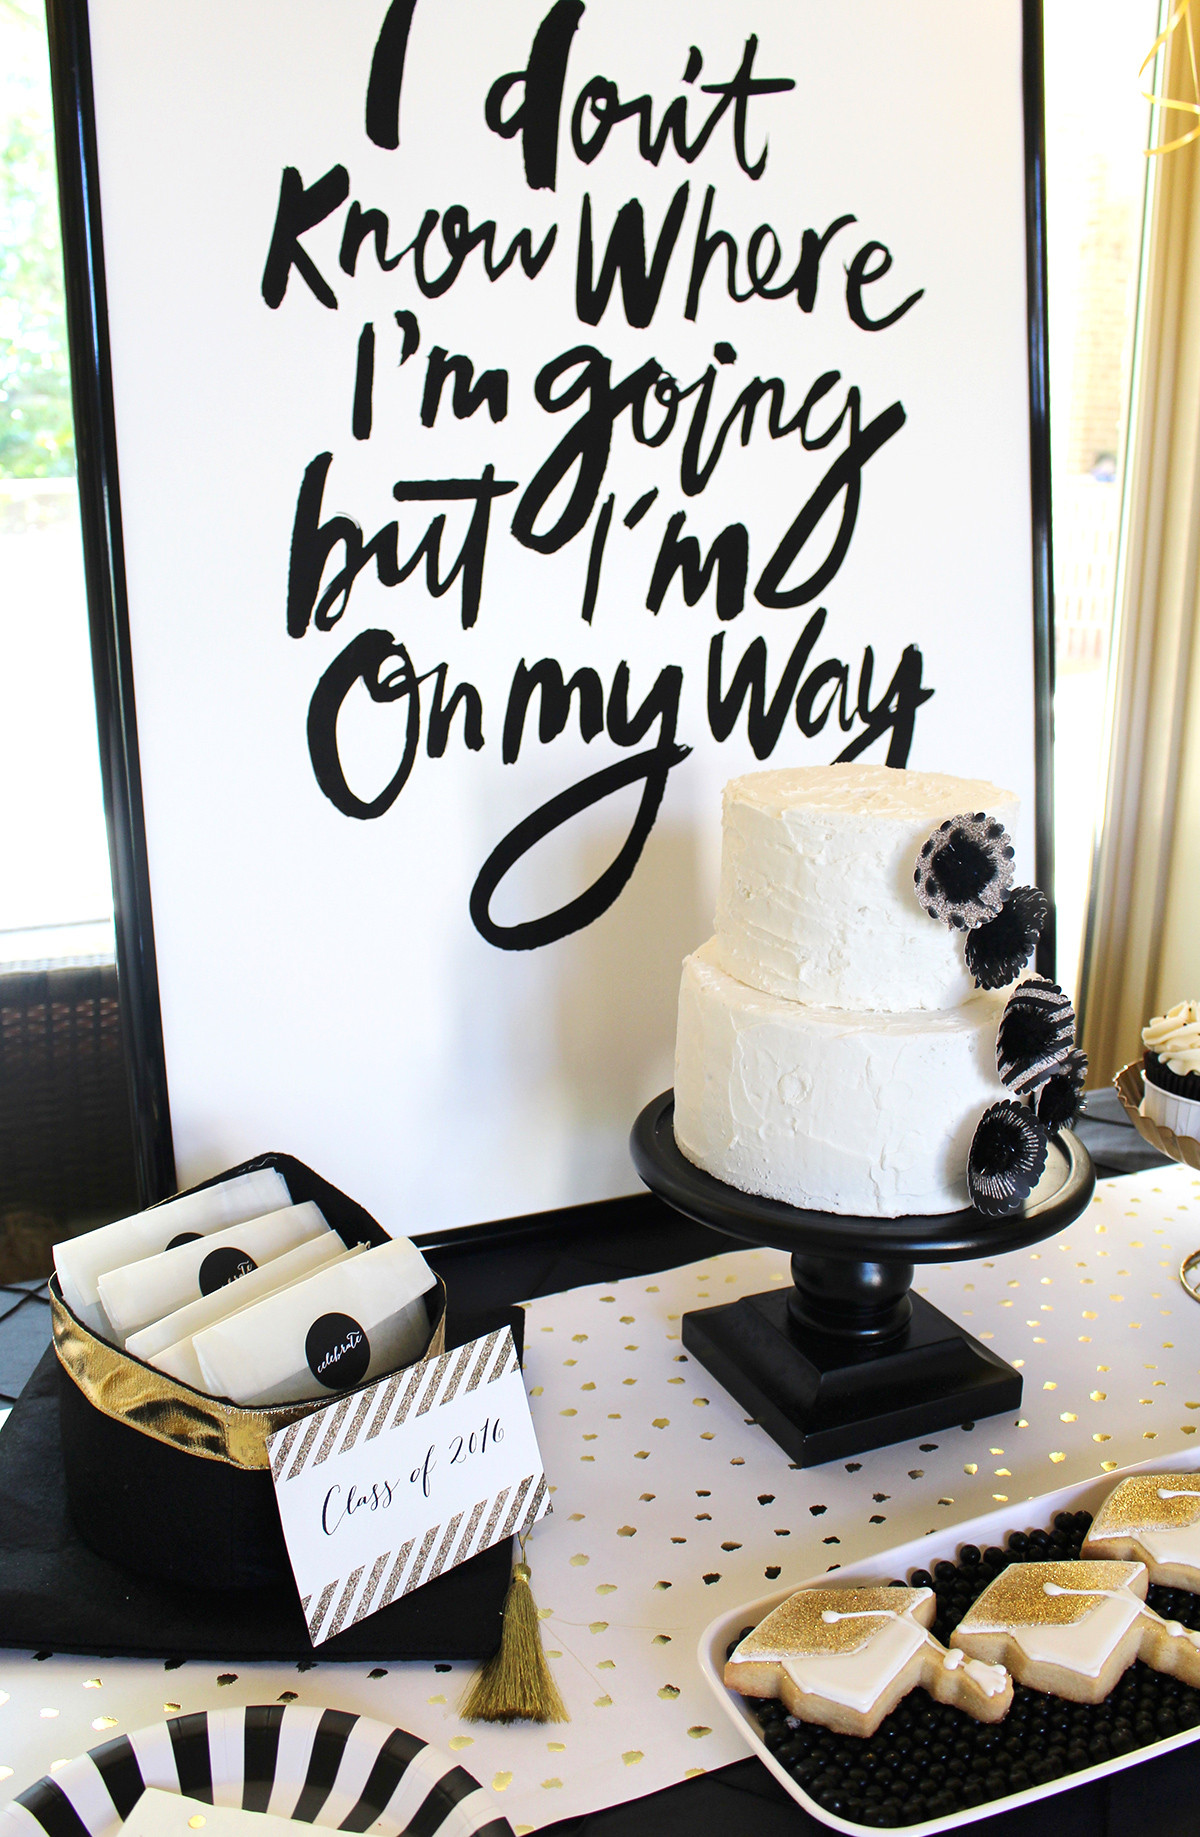 College Graduation Ideas For Party
 Stylish Black White Gold Graduation Party